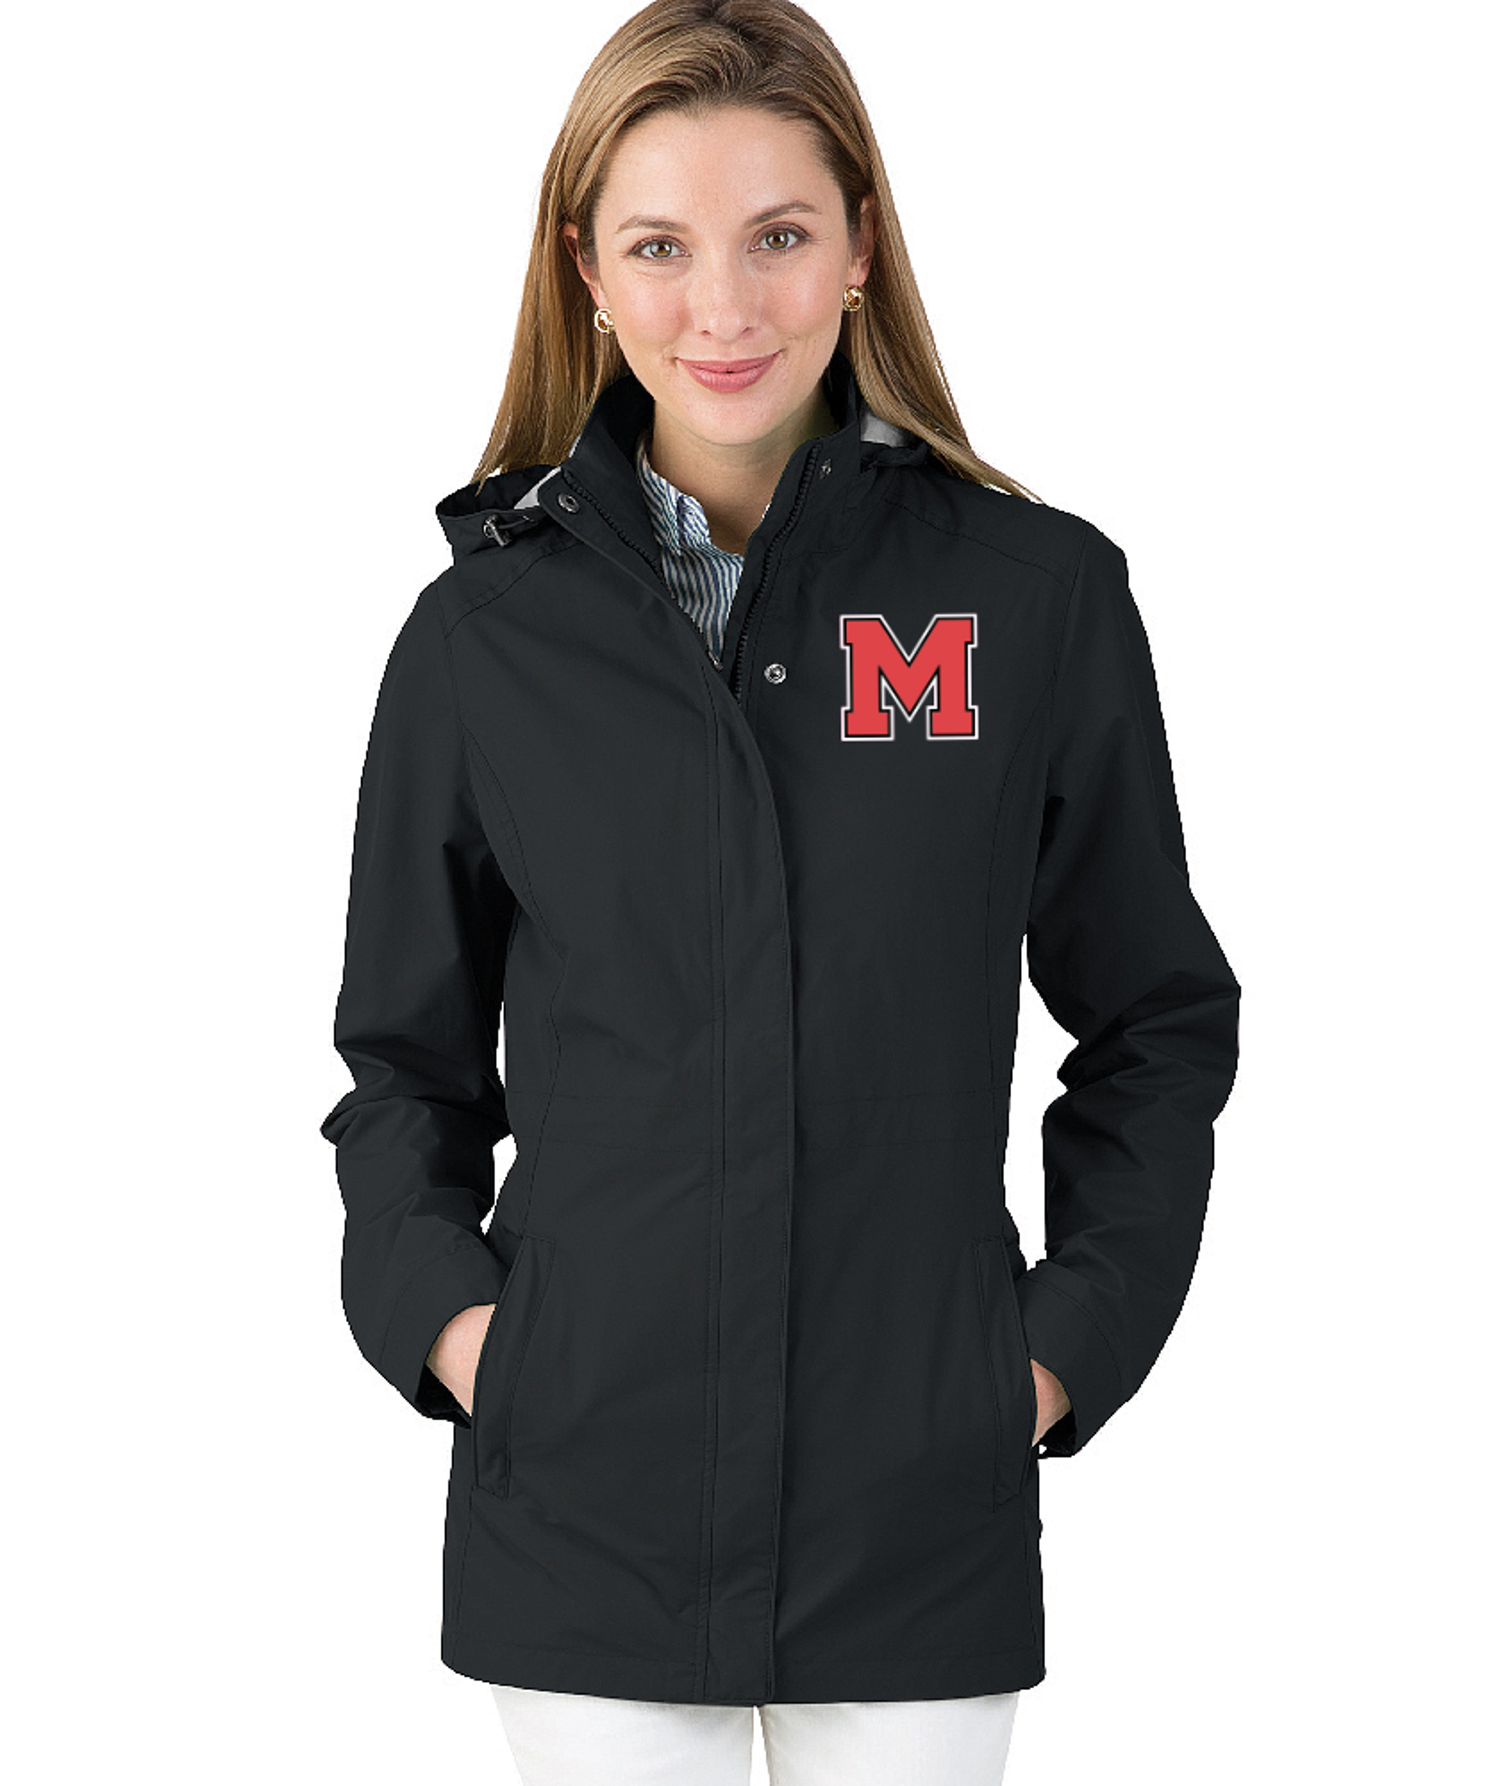 Marblehead M Embroidered Women’s Logan Jacket